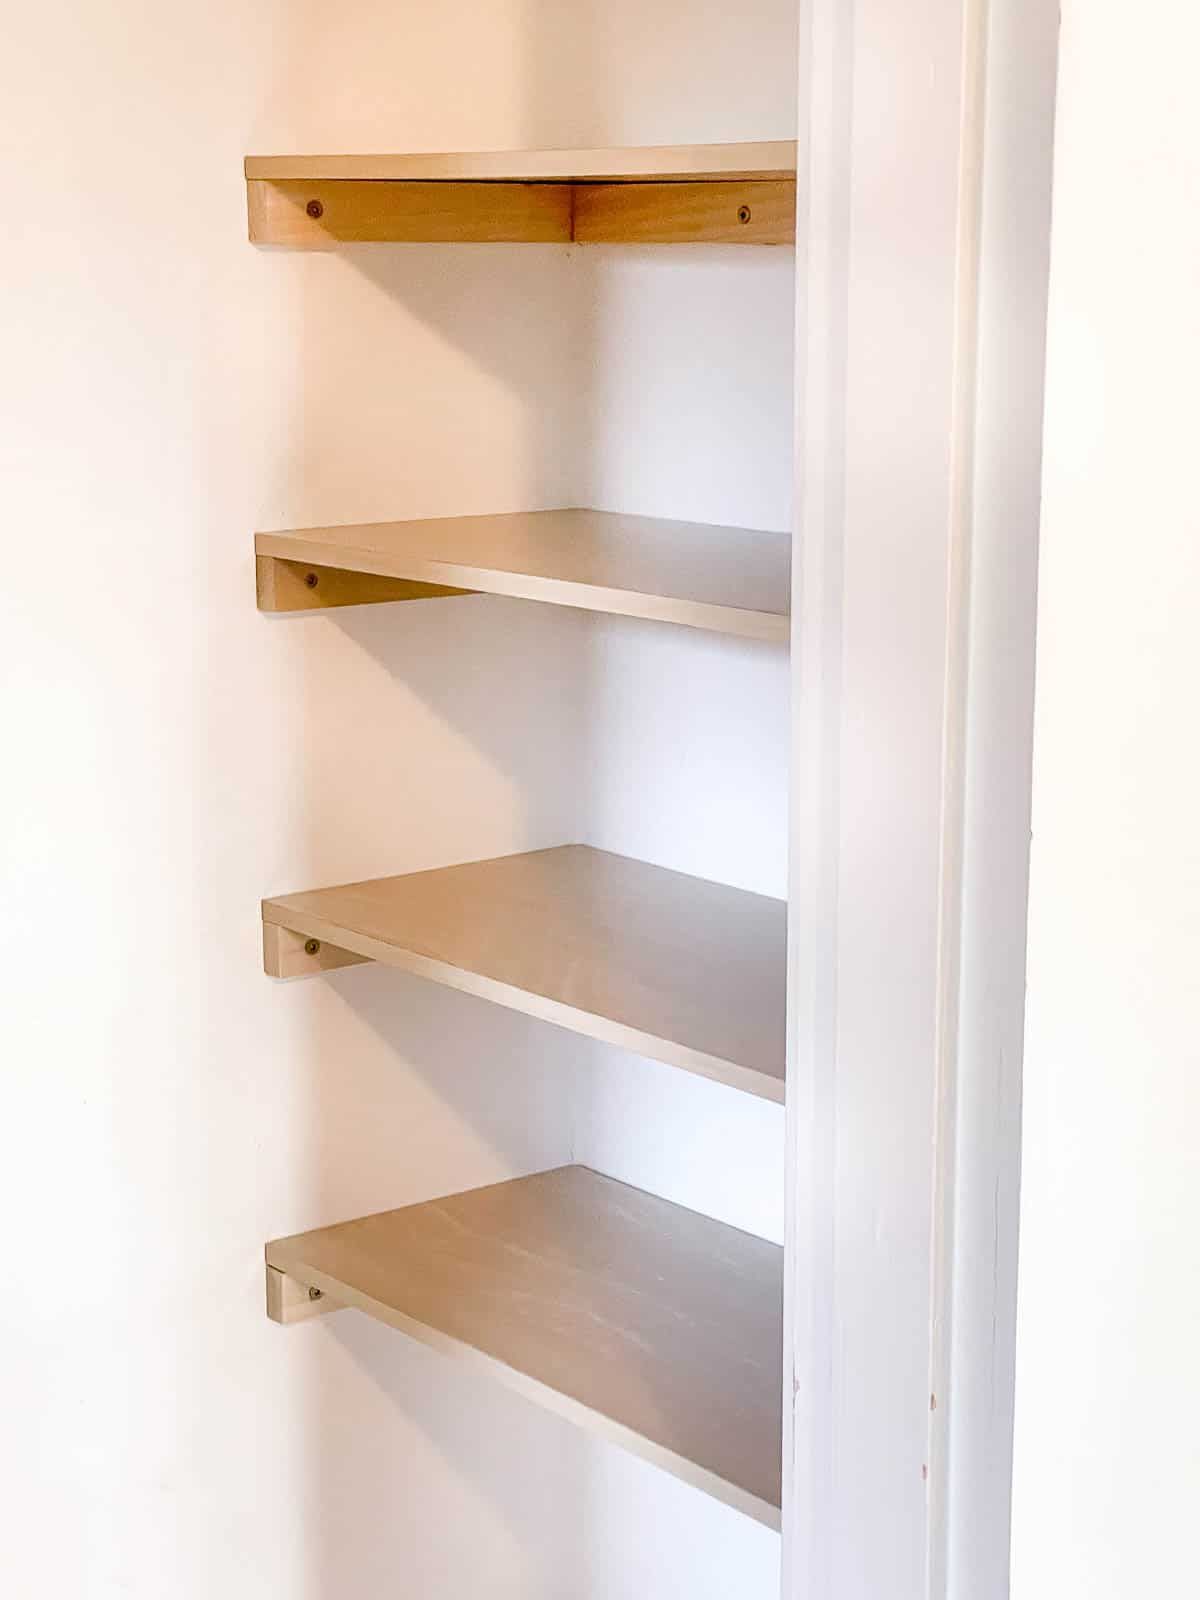 Some interesting and beautiful ideas for
  diy shelves